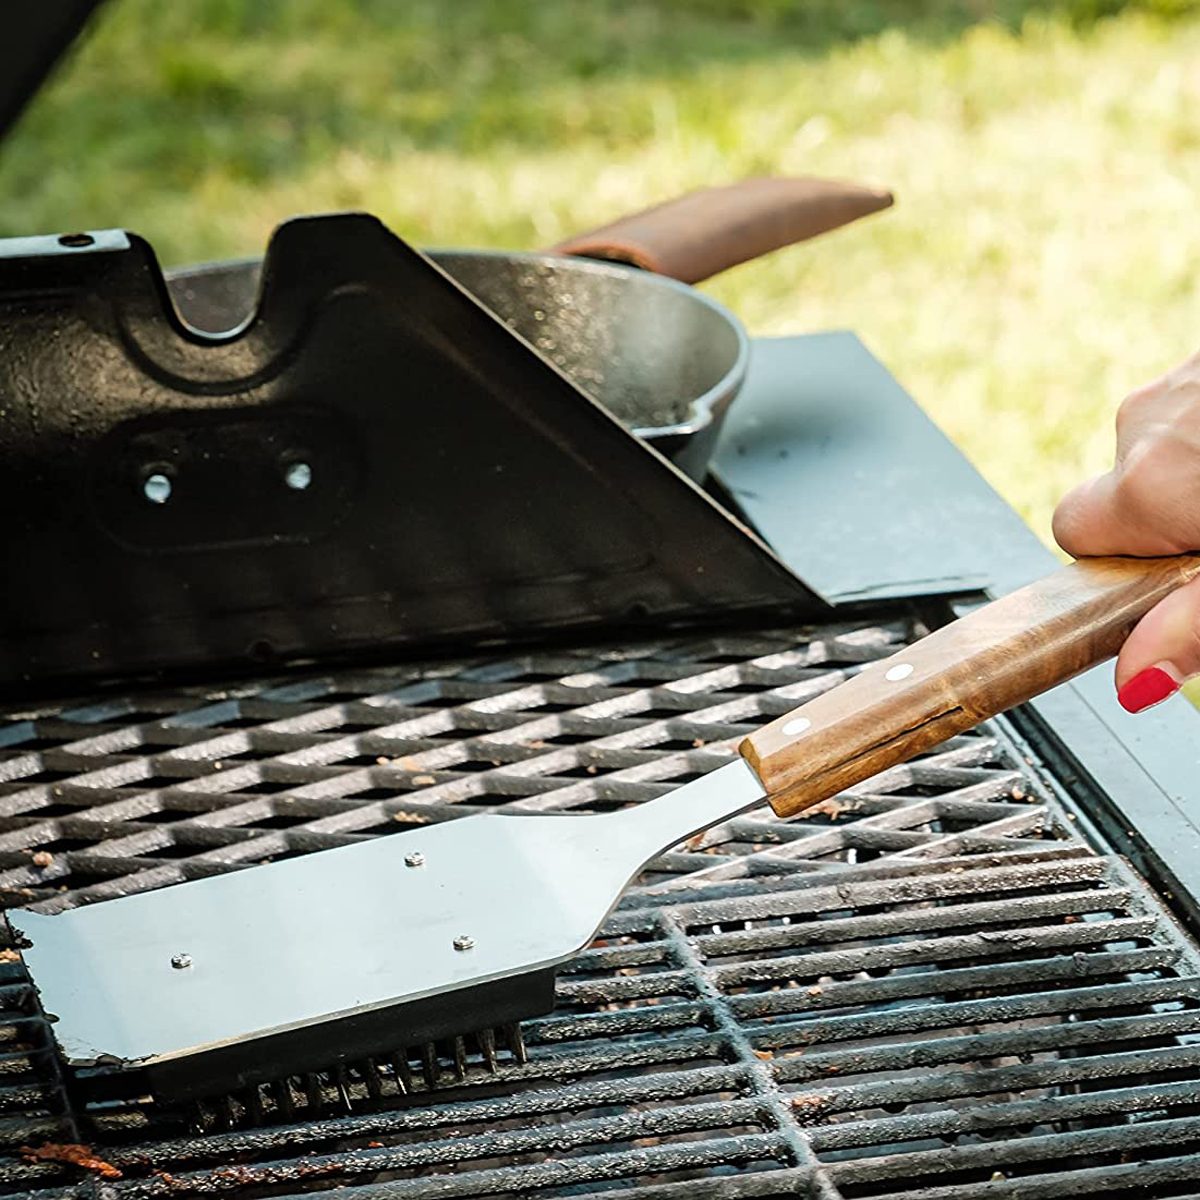 https://www.familyhandyman.com/wp-content/uploads/2020/06/BBQ-Aid-Grill-Brush-and-Scraper-for-Barbecue-ecomm_amazon.com_.jpg